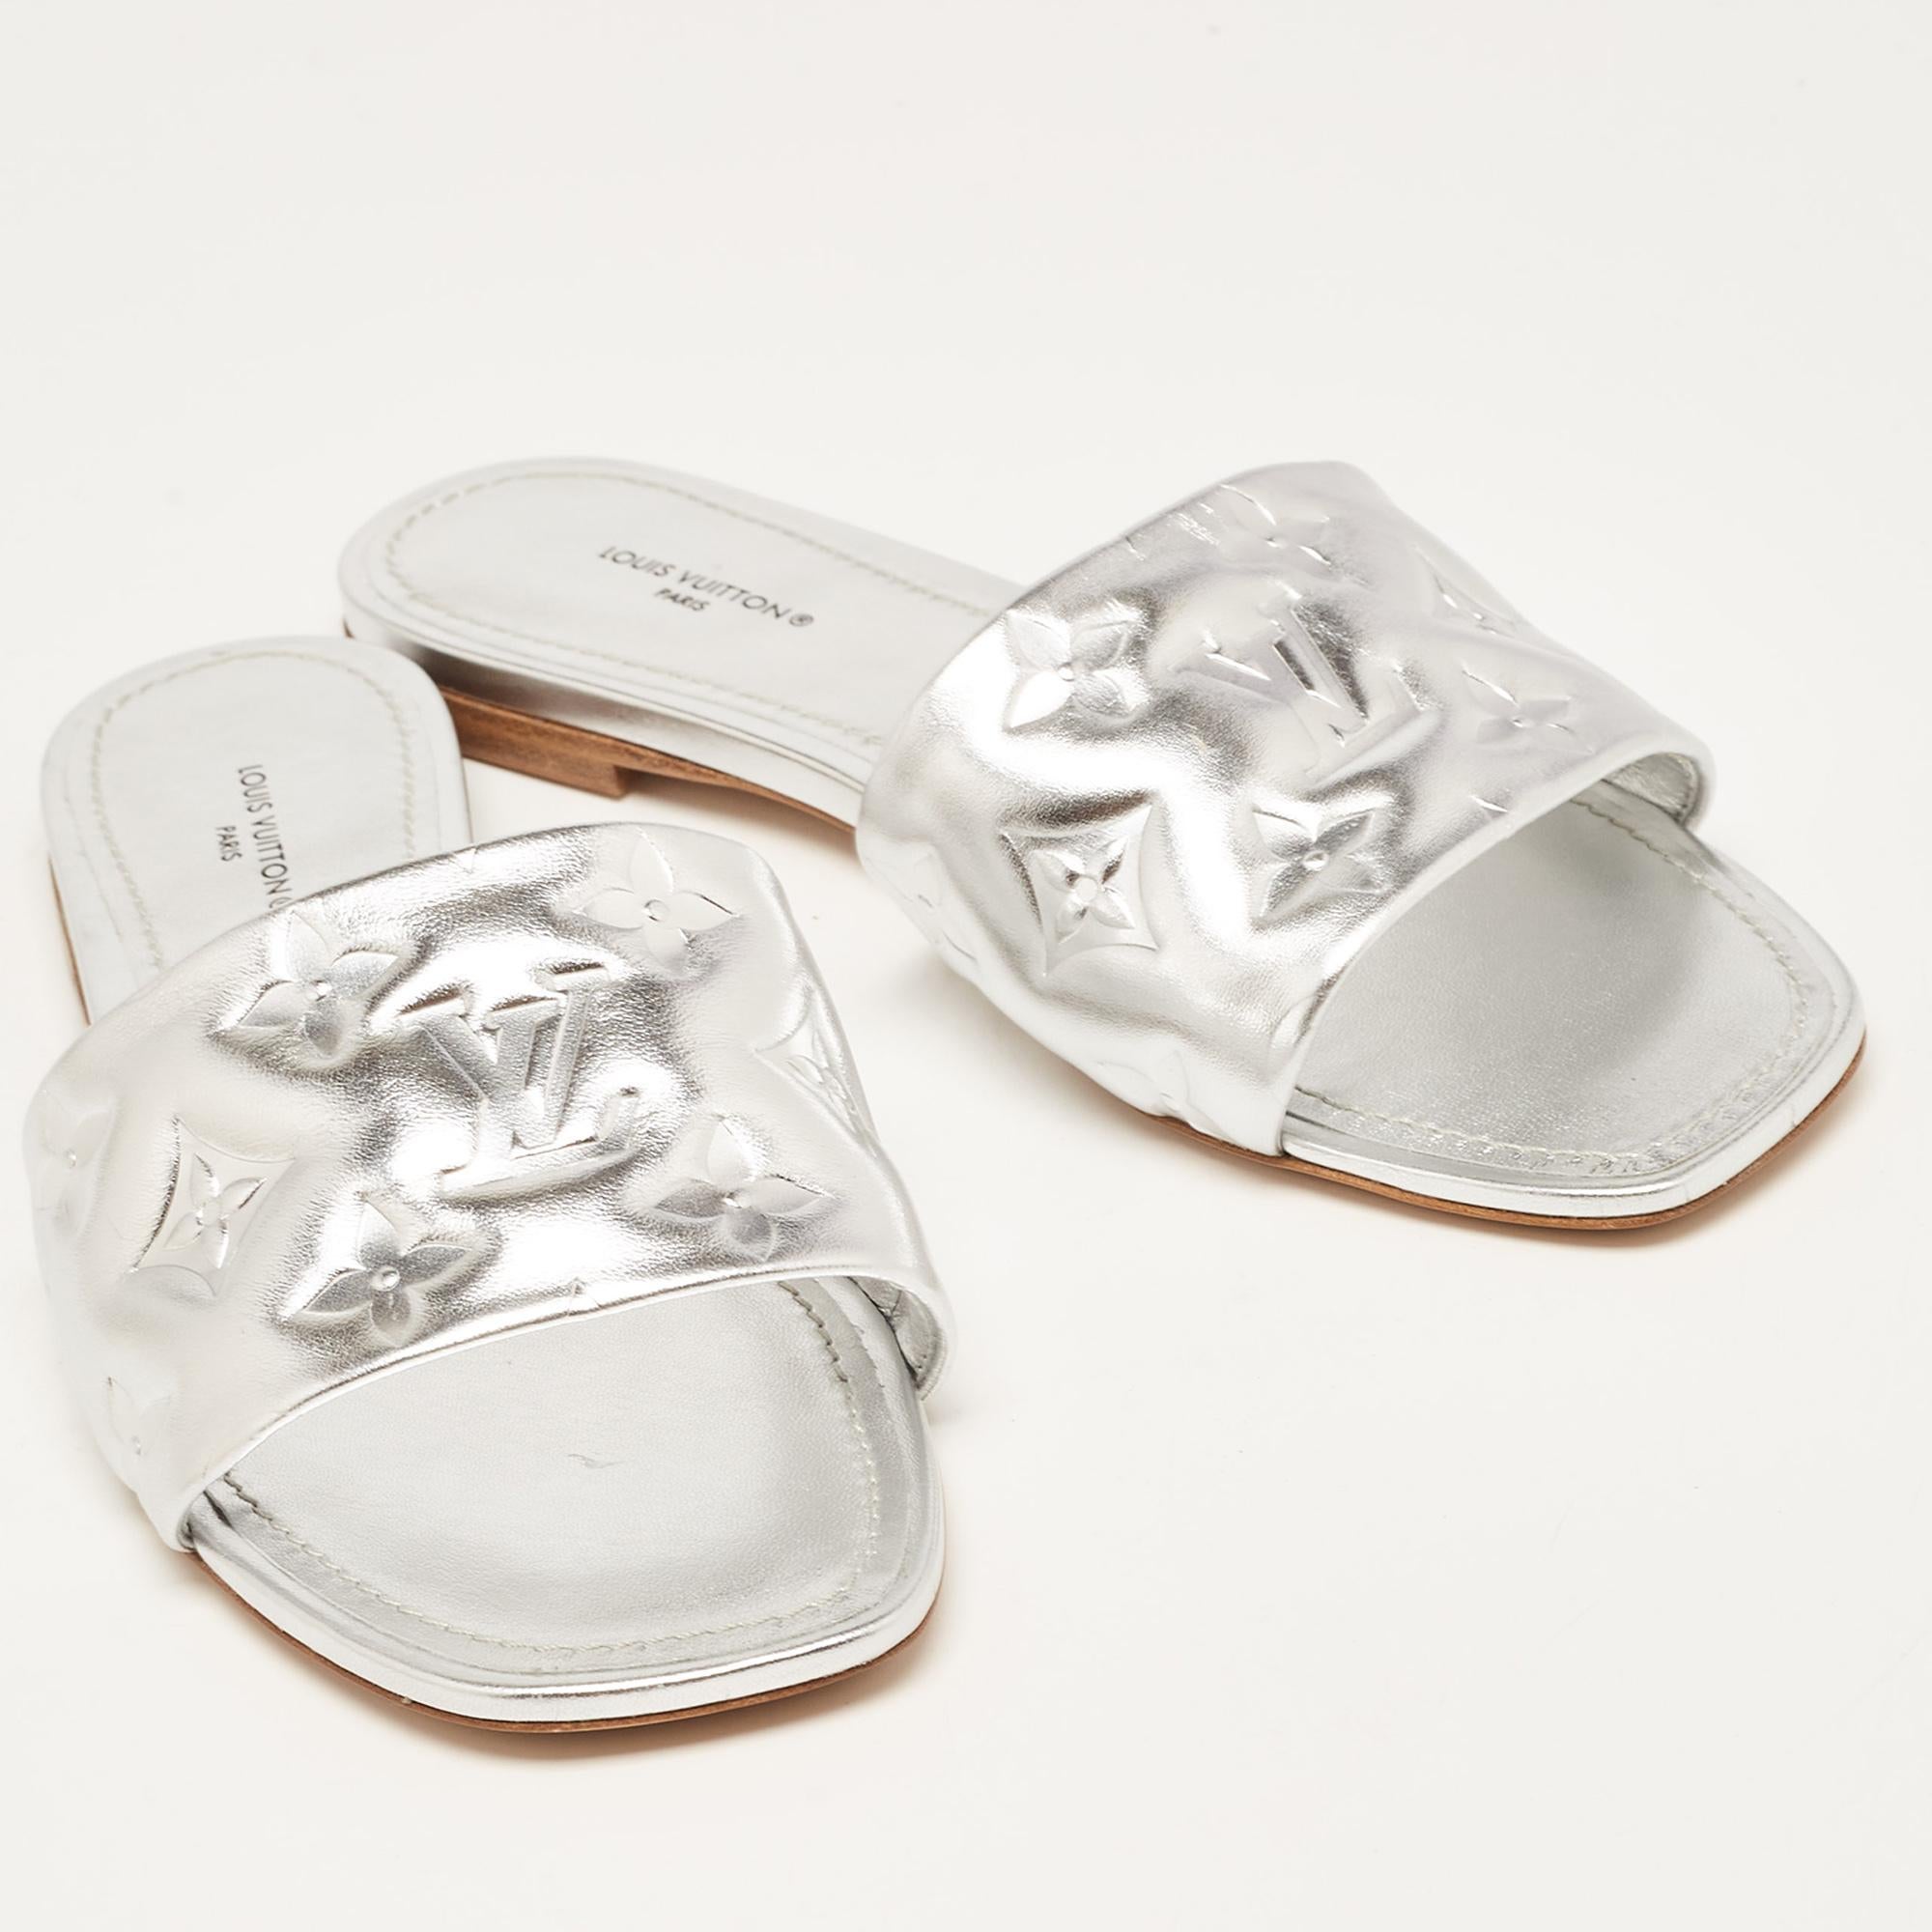 Louis Vuitton Silver Monogram Embossed Leather Revival Flat Slides Size 38 4